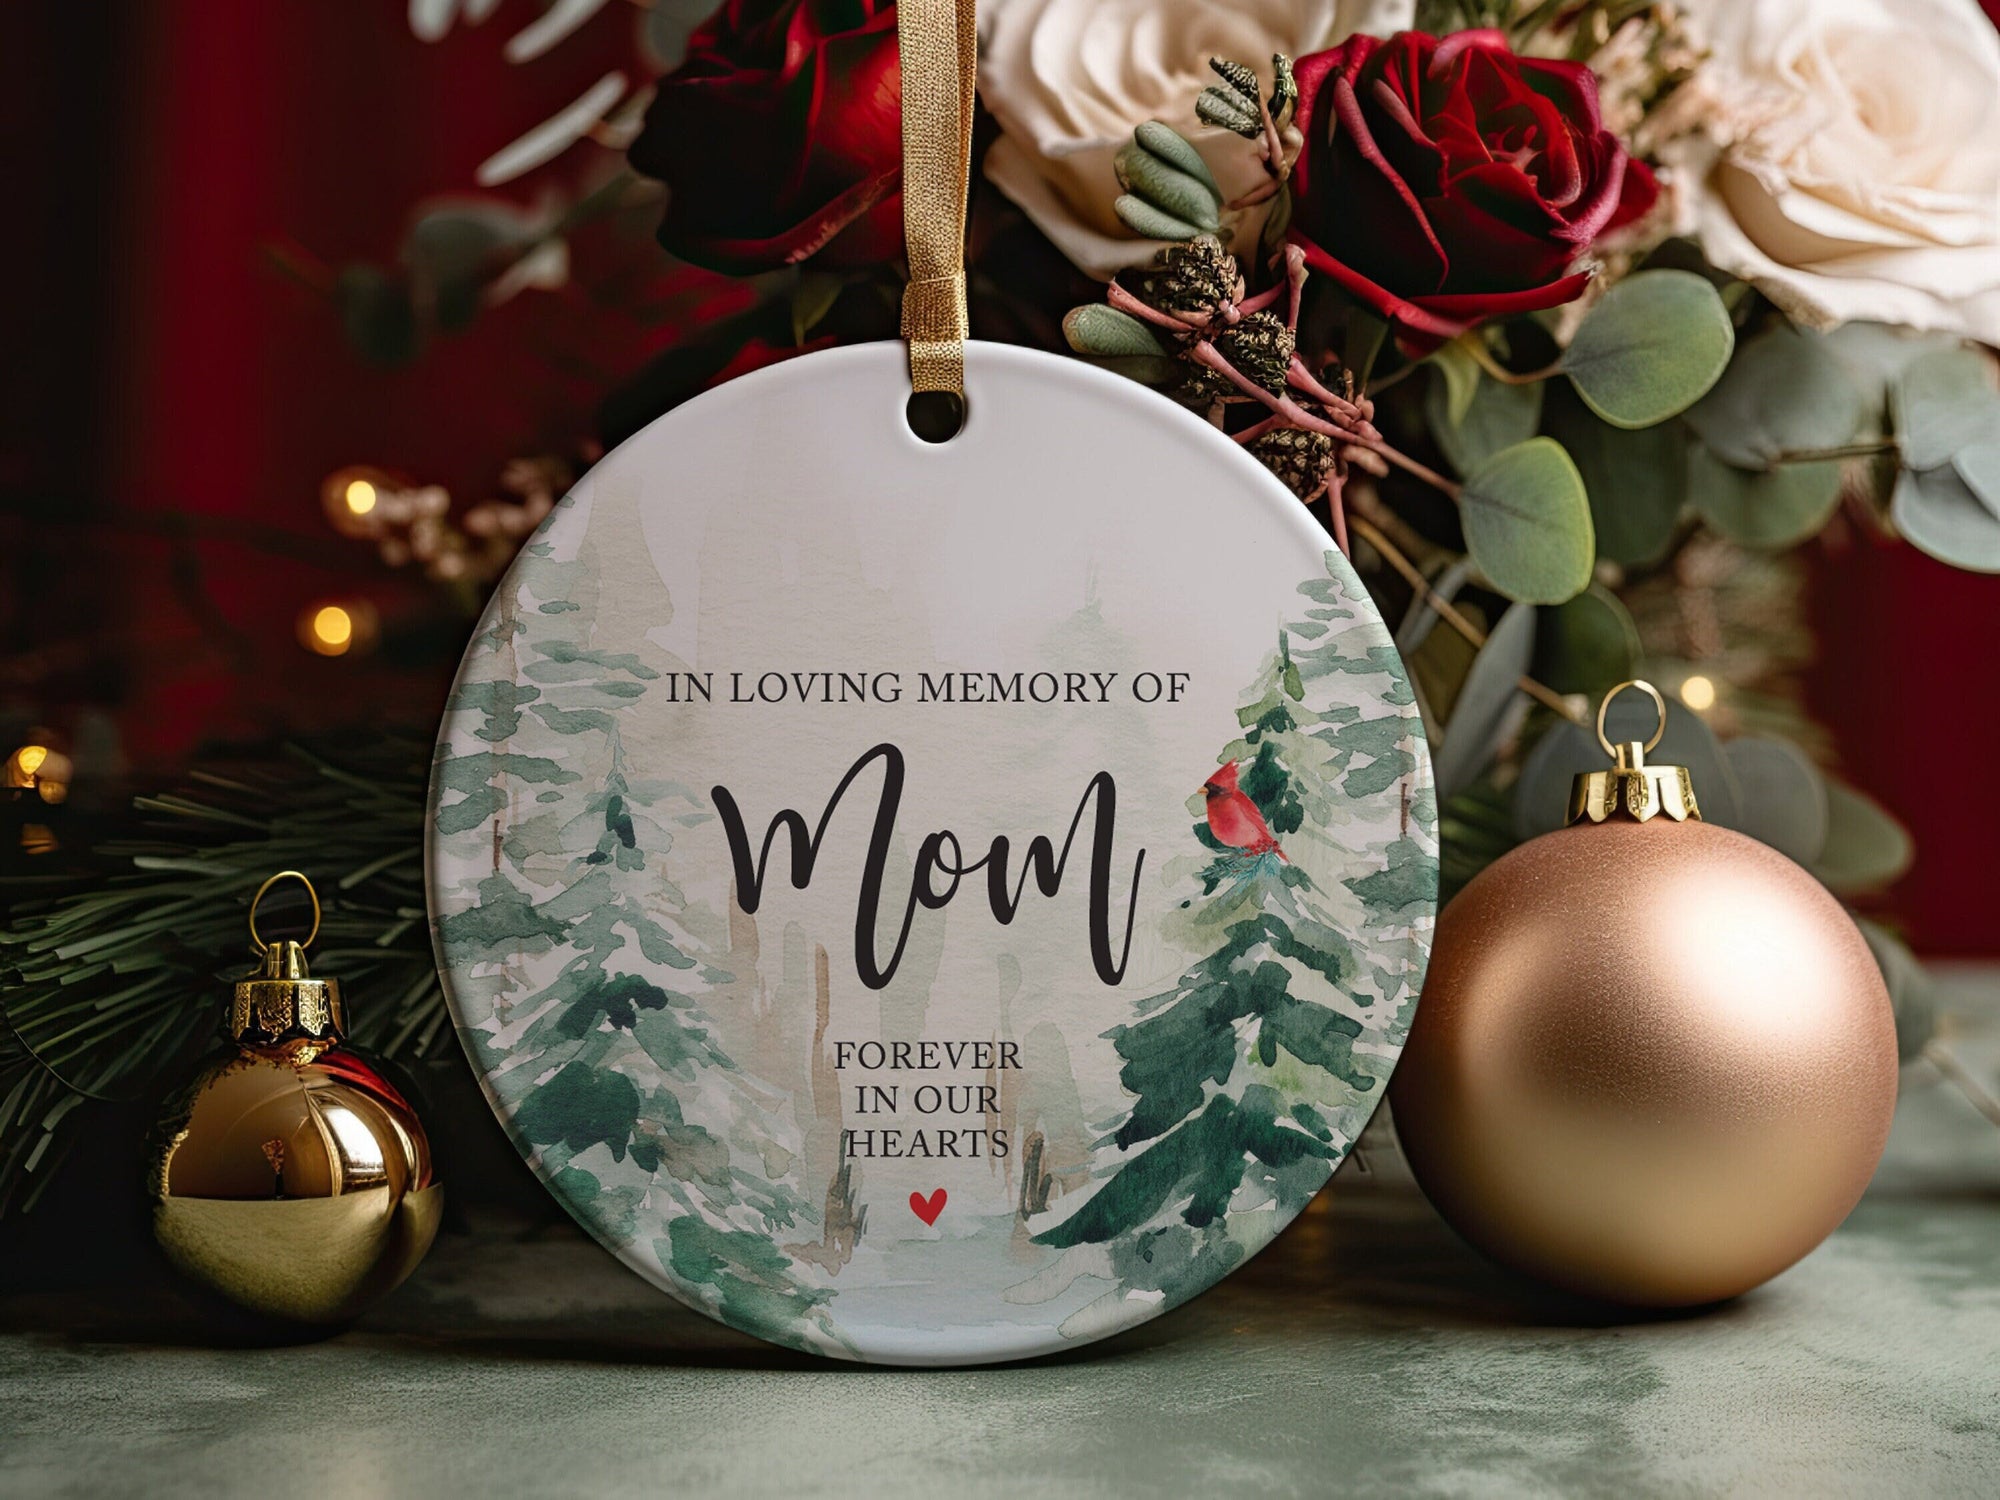 In Loving Memory Of Mom Forever In Our Hearts, Christmas Ornament + Free Gift Box and Ribbon, In Loving Memory of Mother Present Idea, Cardinal